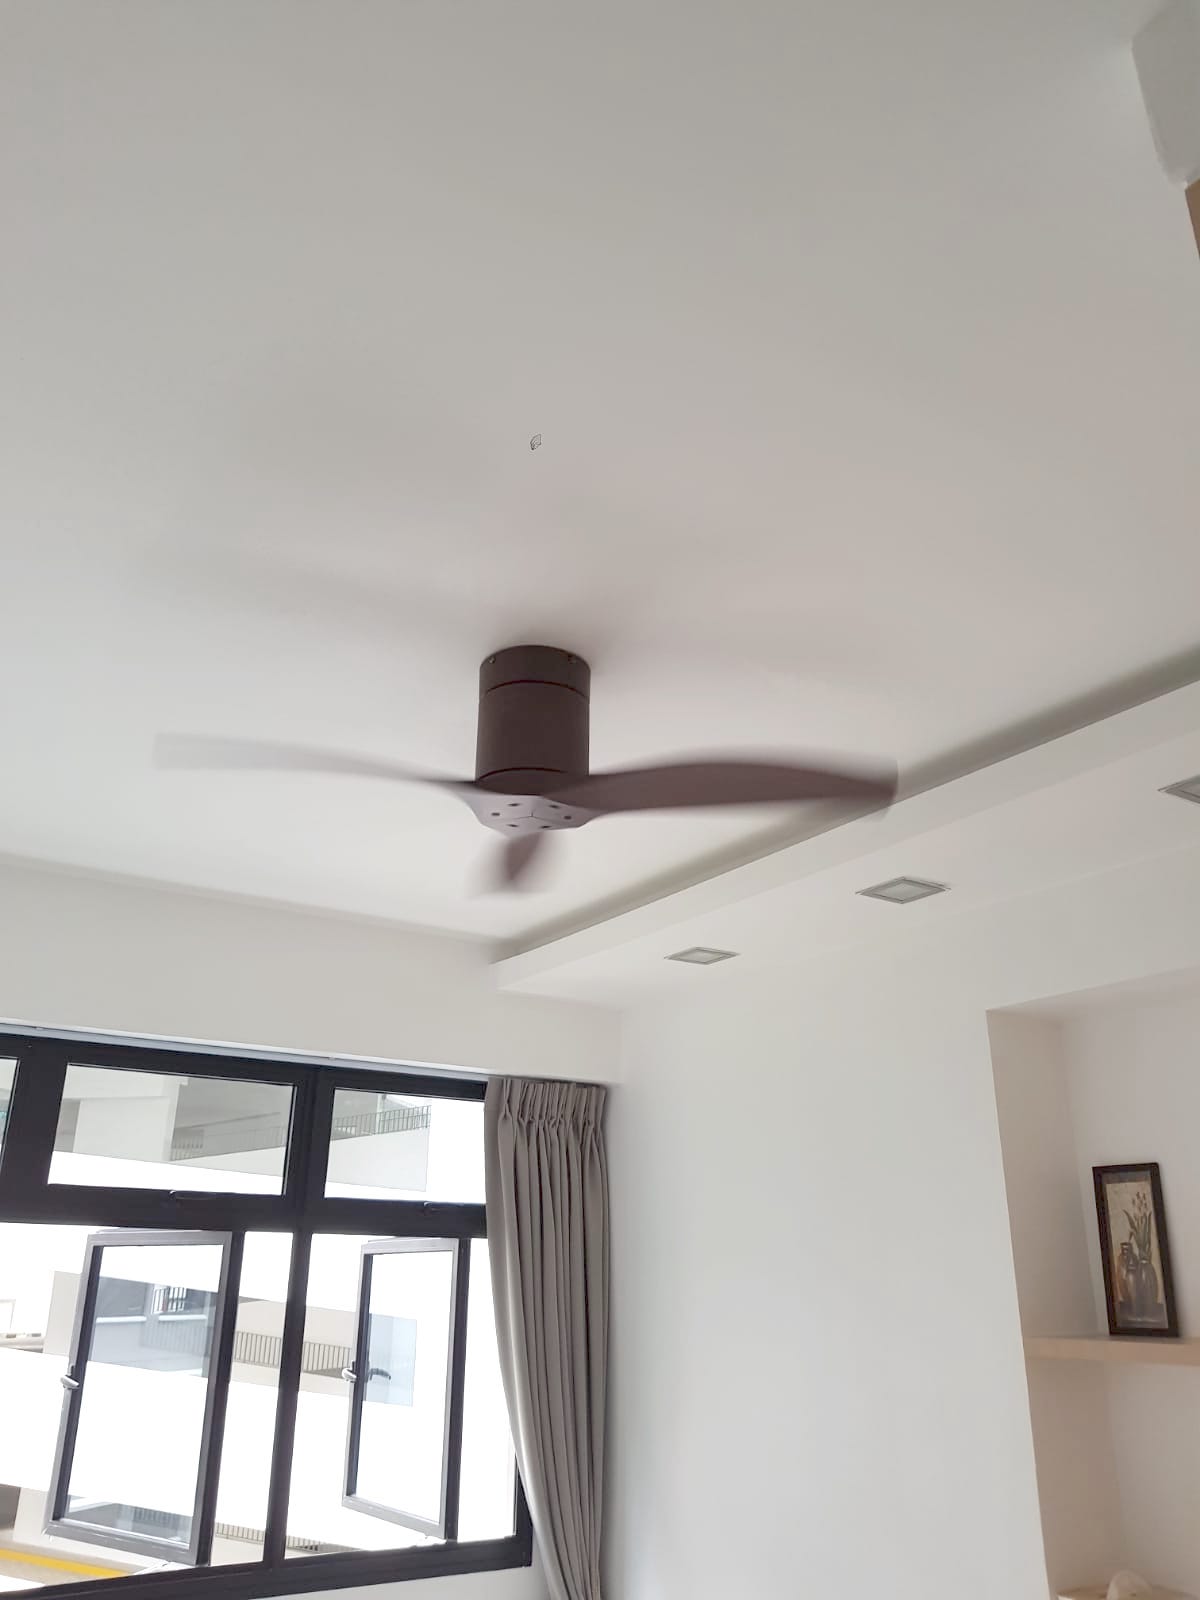 2020 Buyers Guide For Ceiling Fans In Singapore Sembawang Lighting House Pte Ltd